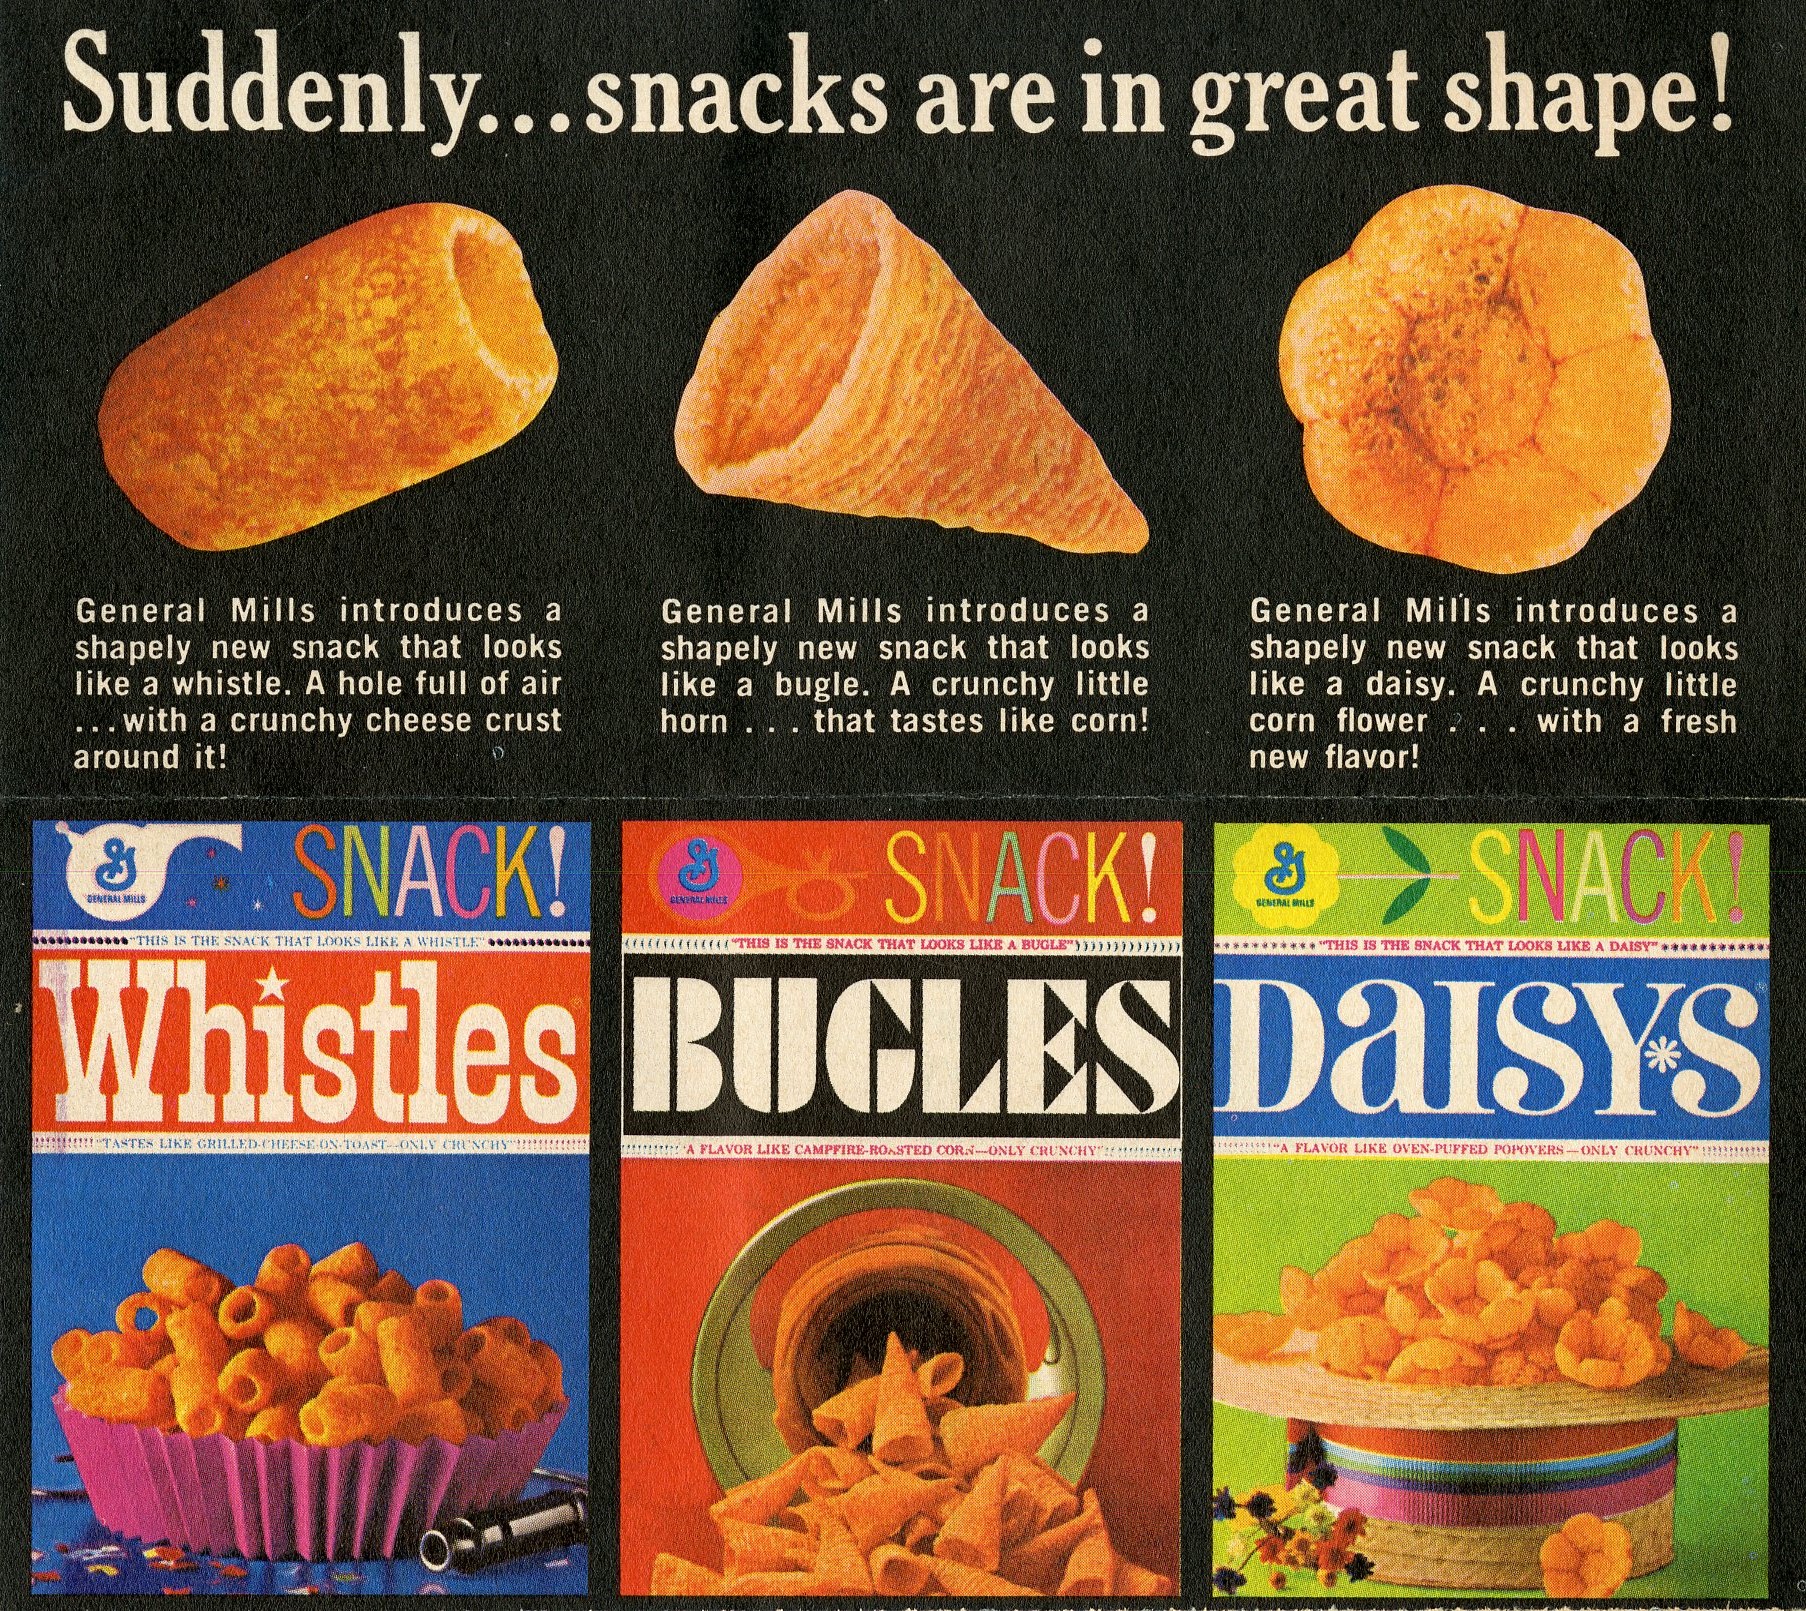 Bright and colorful packaging images of Whistles, Bugles, and Daisy’s snacks with individual images of each snack piece above showing the shape and texture with headline, "Suddenly… snacks are in great shape!"